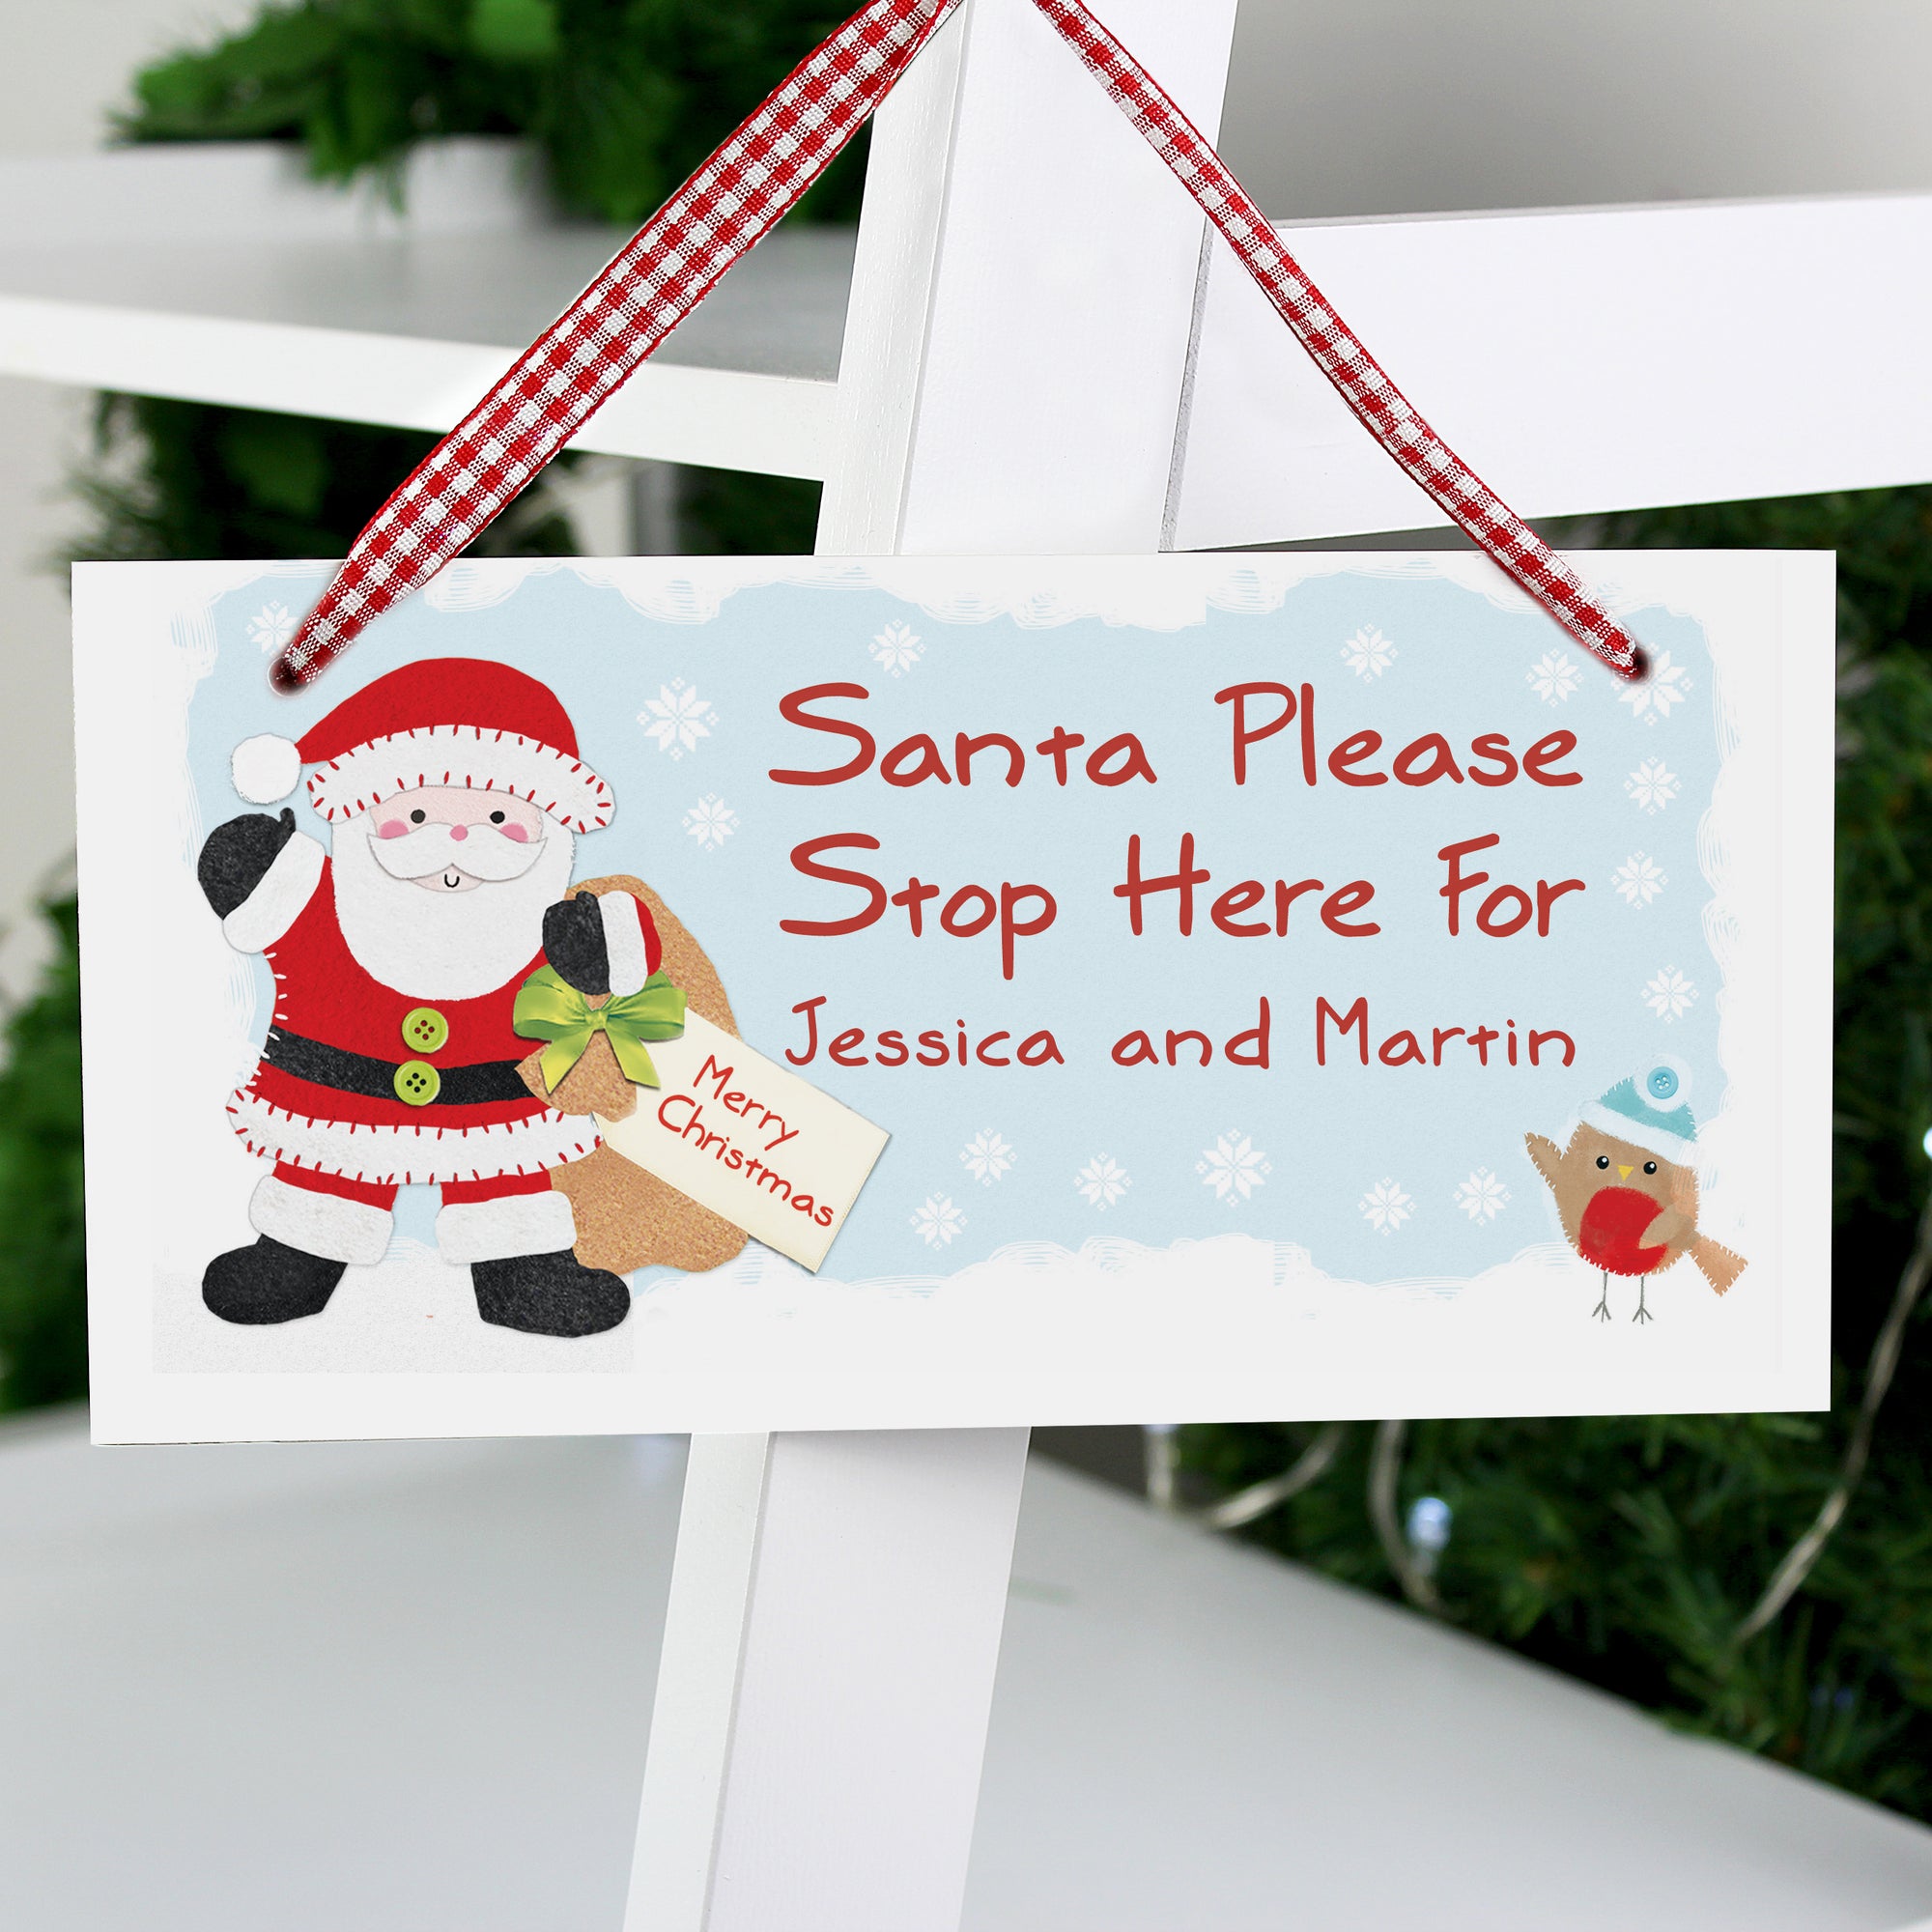 Personalised wooden sign printed with a cartoon Santa character holding a Christmas present sack and a robin. The wooden sign features the text 'Santa Please Stop Here For' and then your own names can be added. The sign comes with a ribbon to hang it up and measures approximately 20 cm by 10 cm.